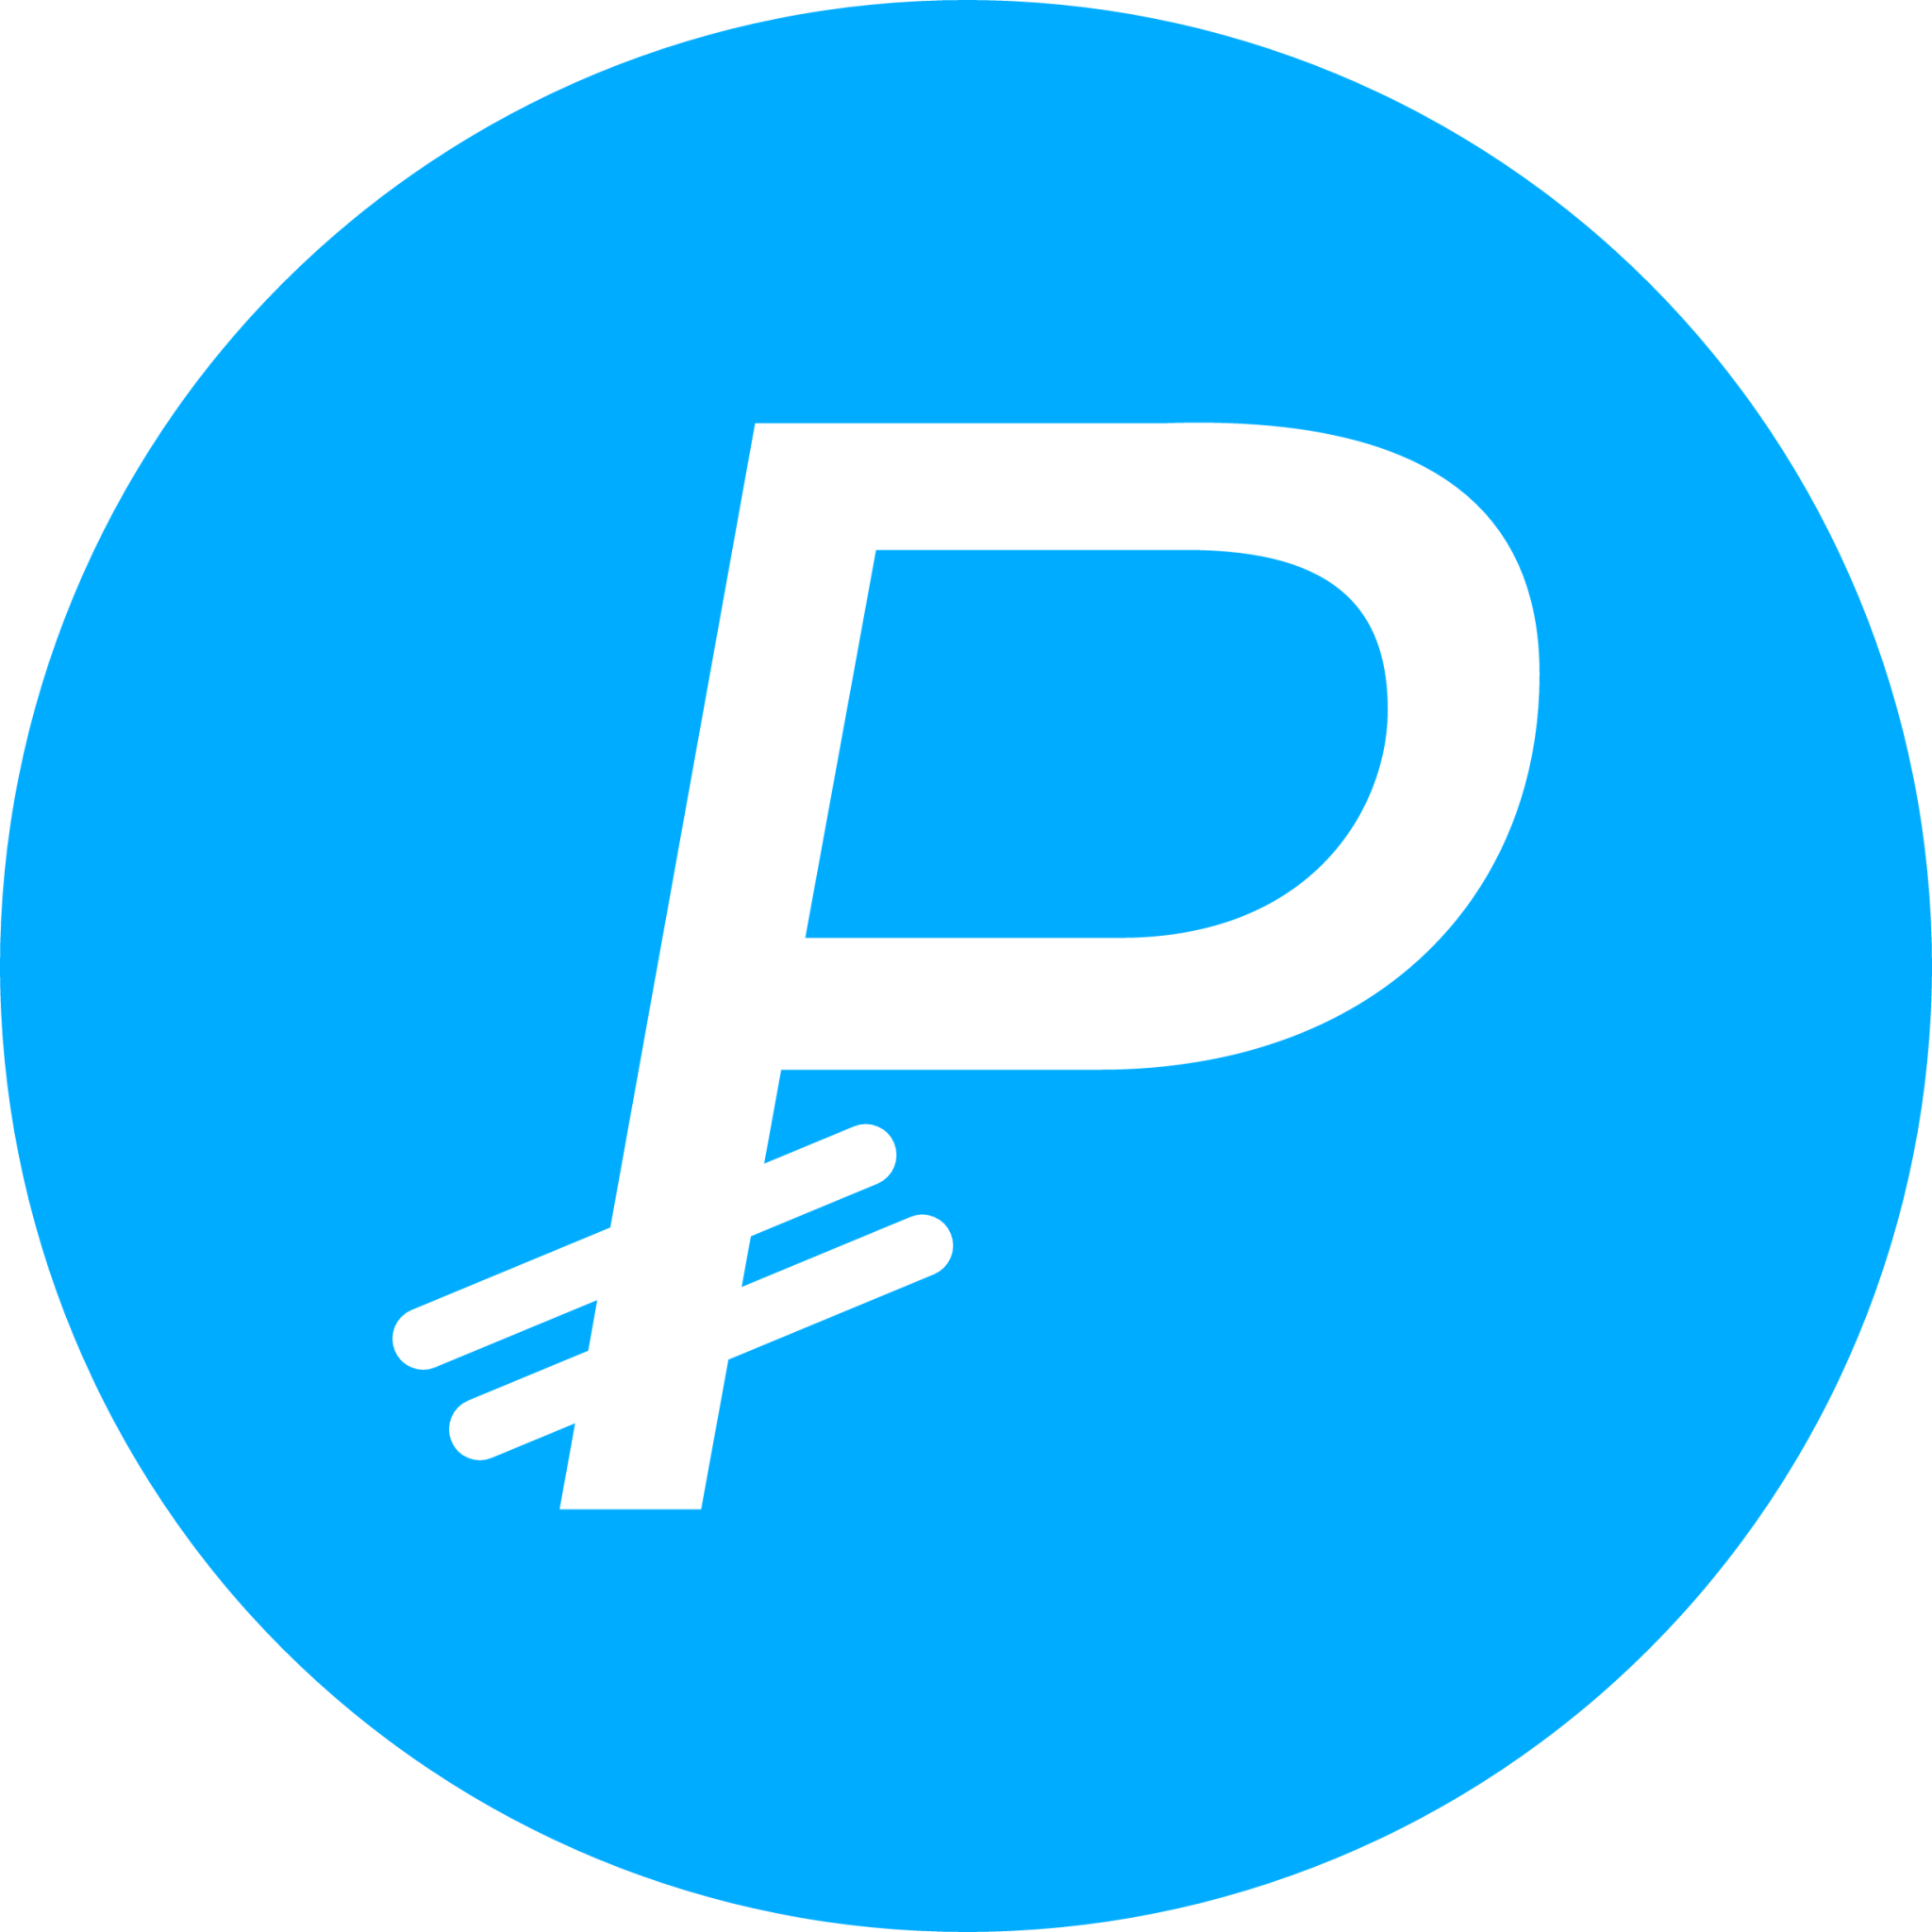 Pascal Lite Cryptocurrency icon